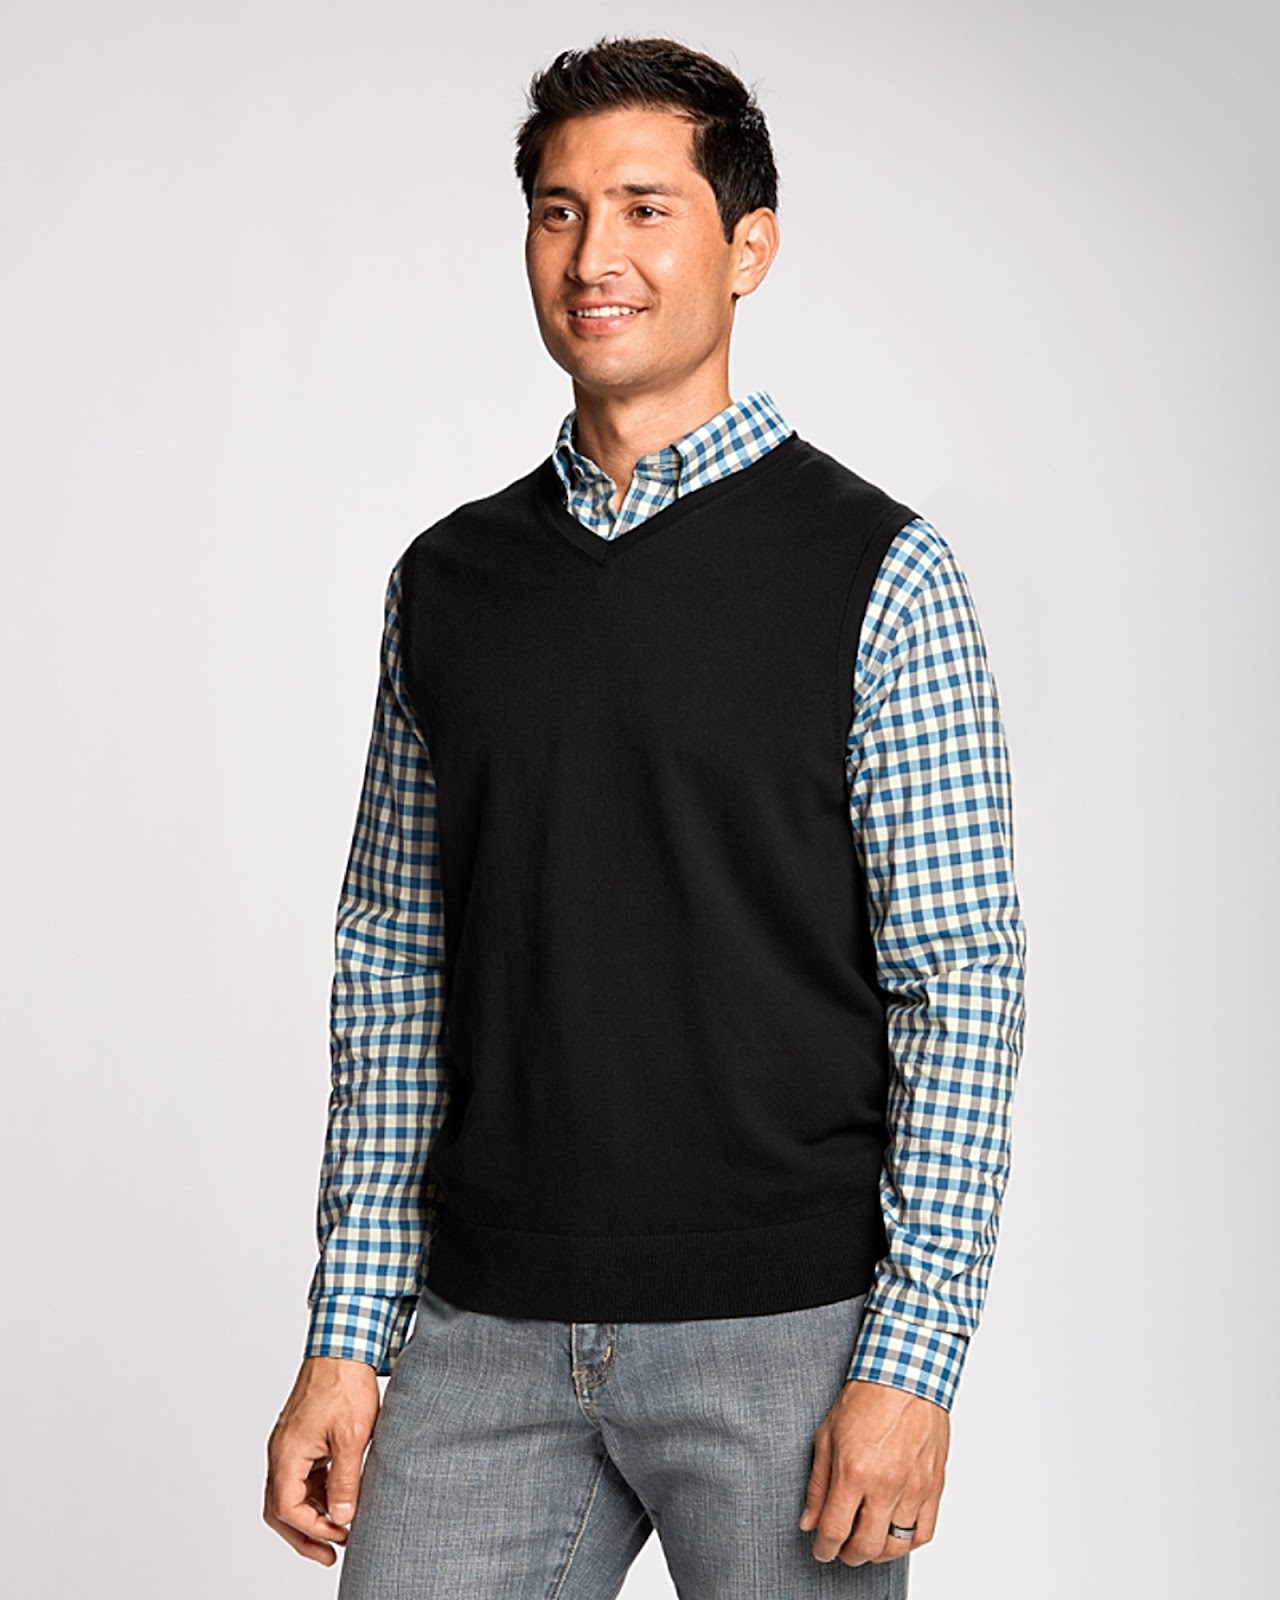 Cutter & Buck Lakemont Sweater Vest for holiday parties